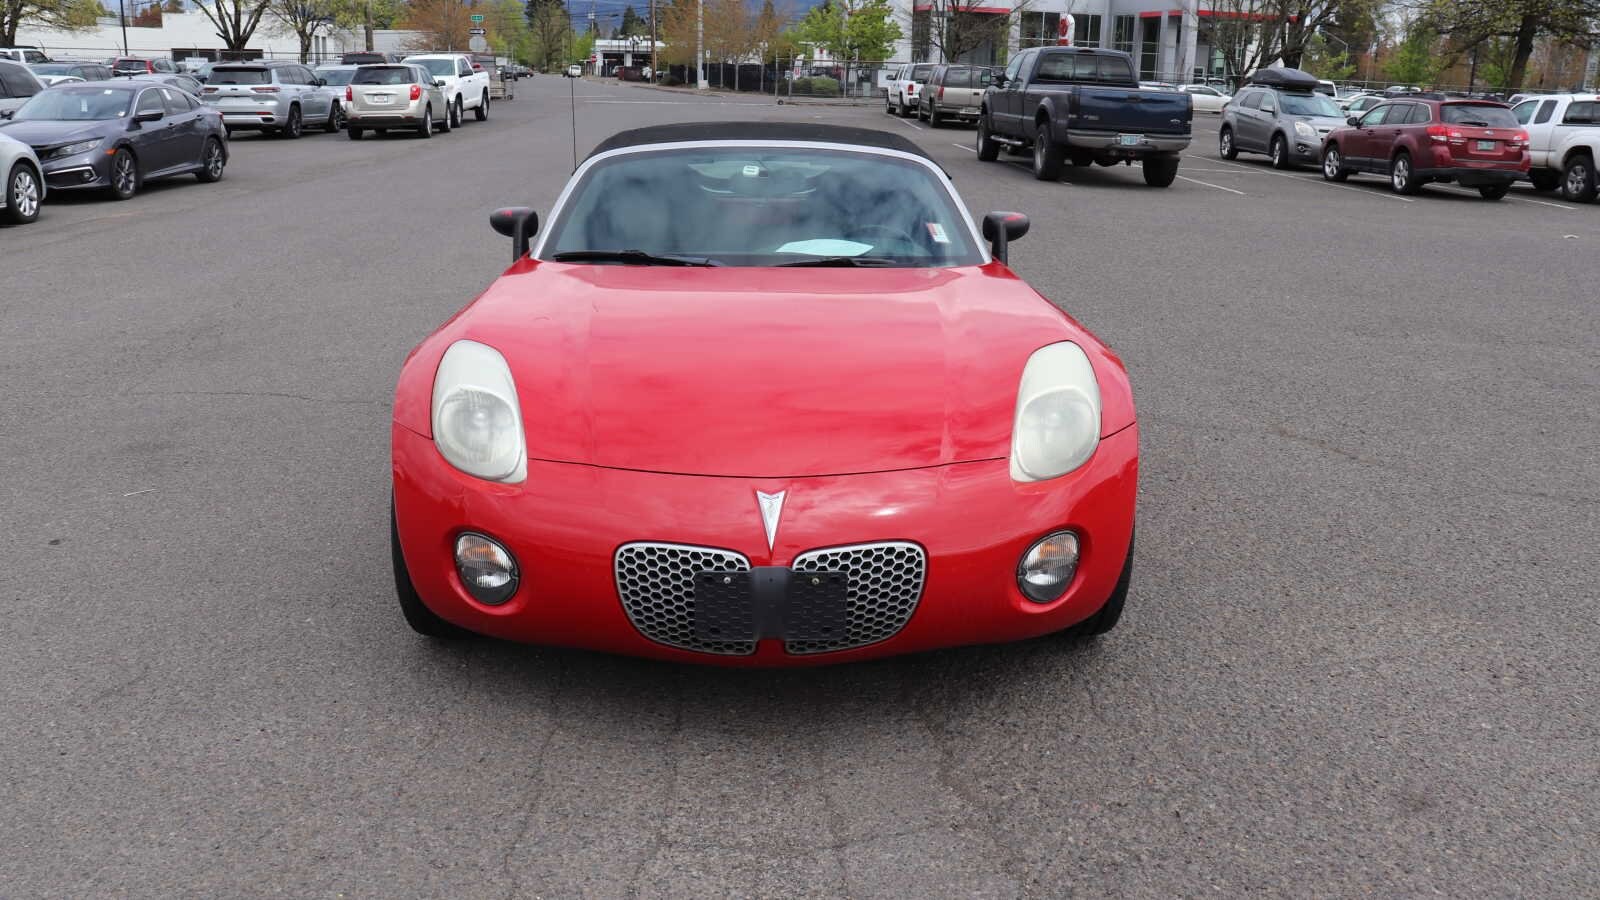 Used 2008 Pontiac Solstice  with VIN 1G2MB35B28Y108838 for sale in Springfield, OR